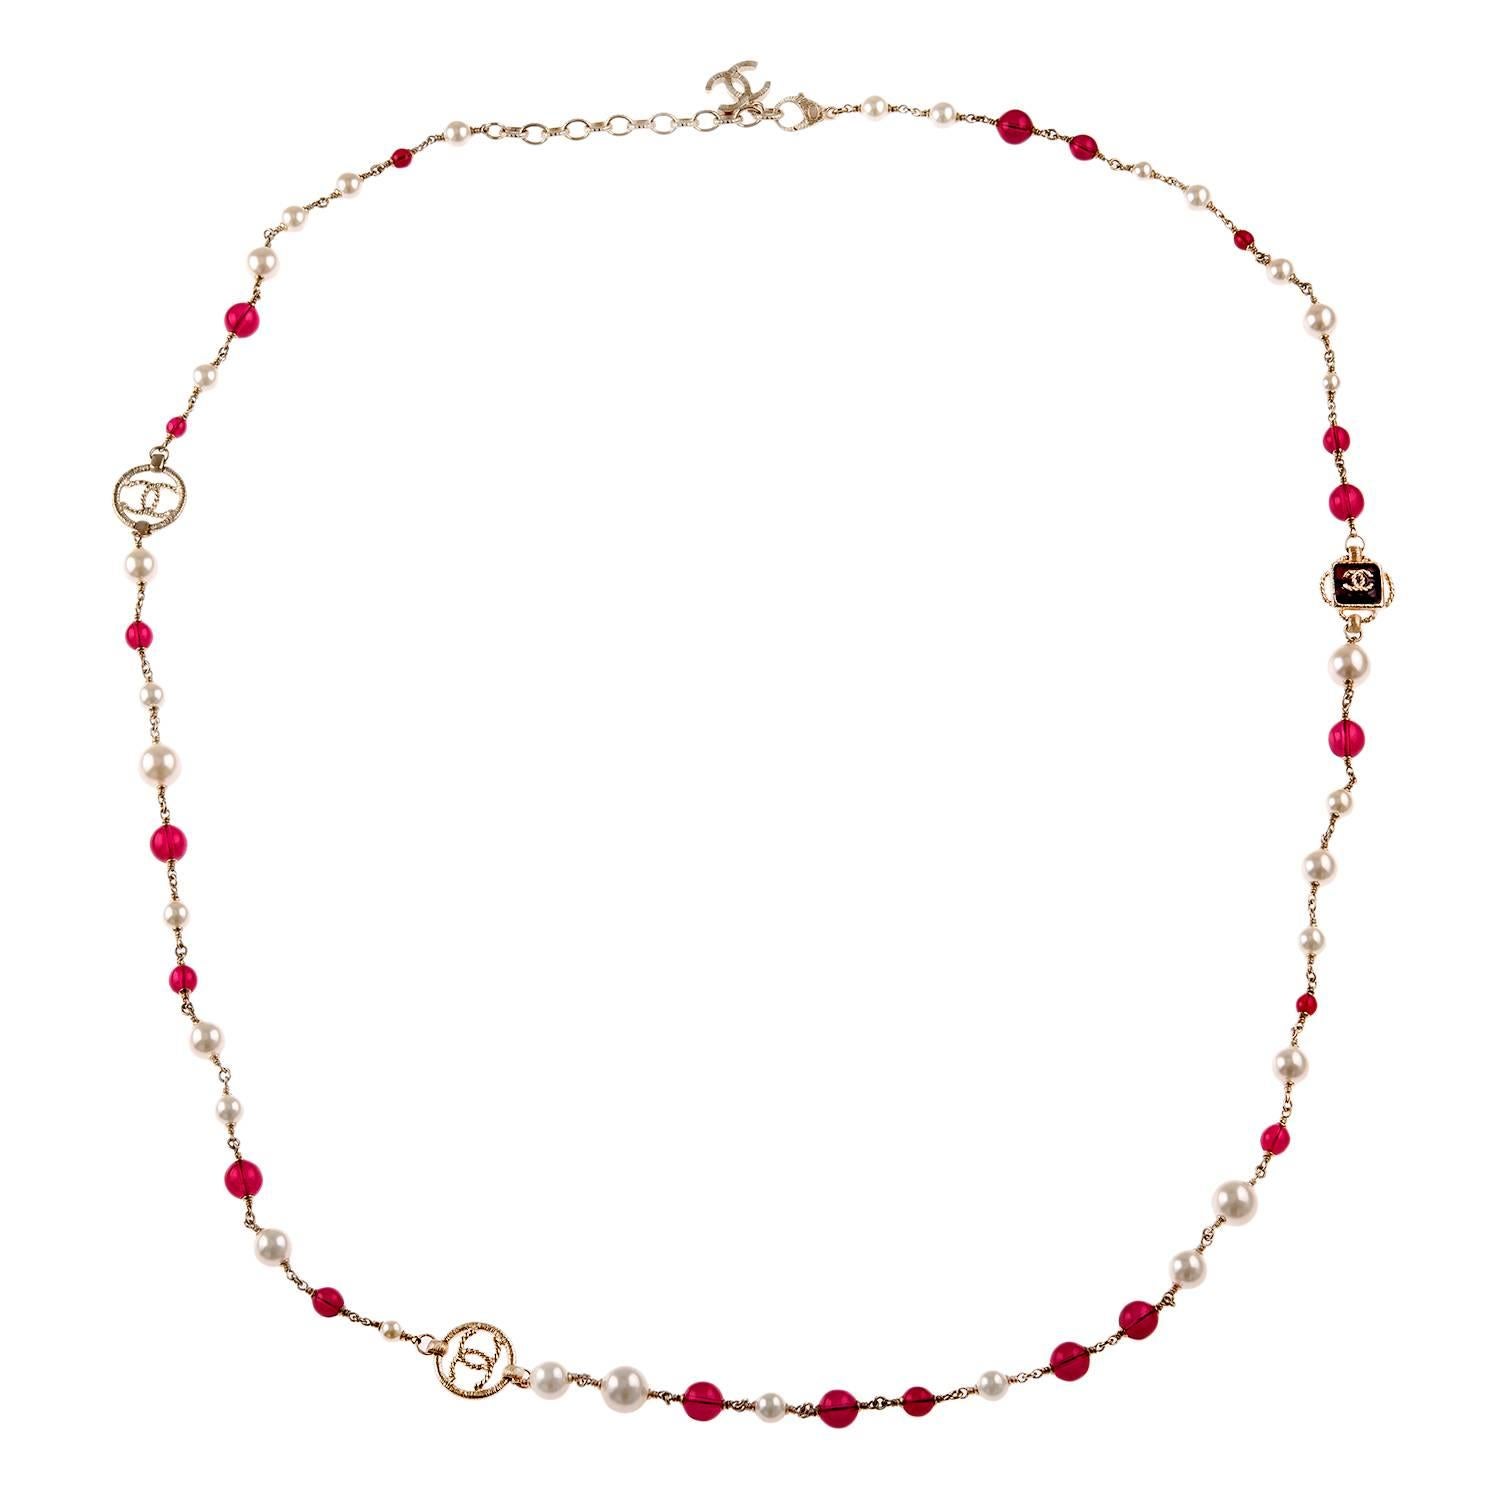 Chanel limited edition matte gold tone sautoir necklace of matte gold tone metal, faux pearls and pinkish red resin beads.

This necklace has alternating glass ivory pearls, and red resin pearls with Florentine finished matte gold braided CC-logo